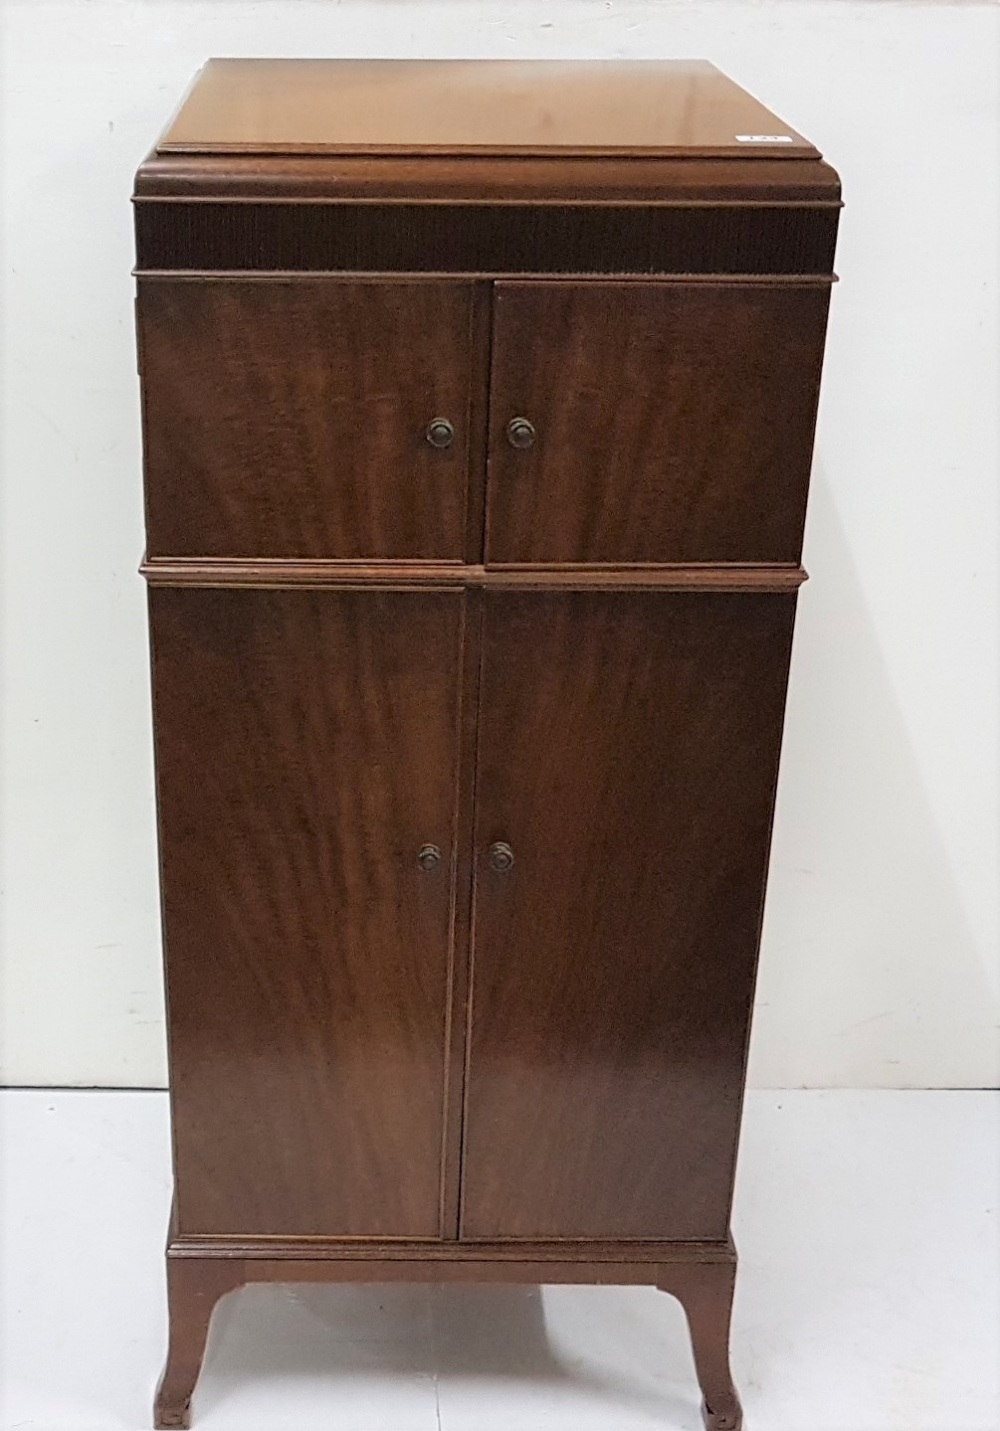 Early 20th C mahogany Music Cabinet with a hinged lid and drawer above a cabinet with 4 sliding